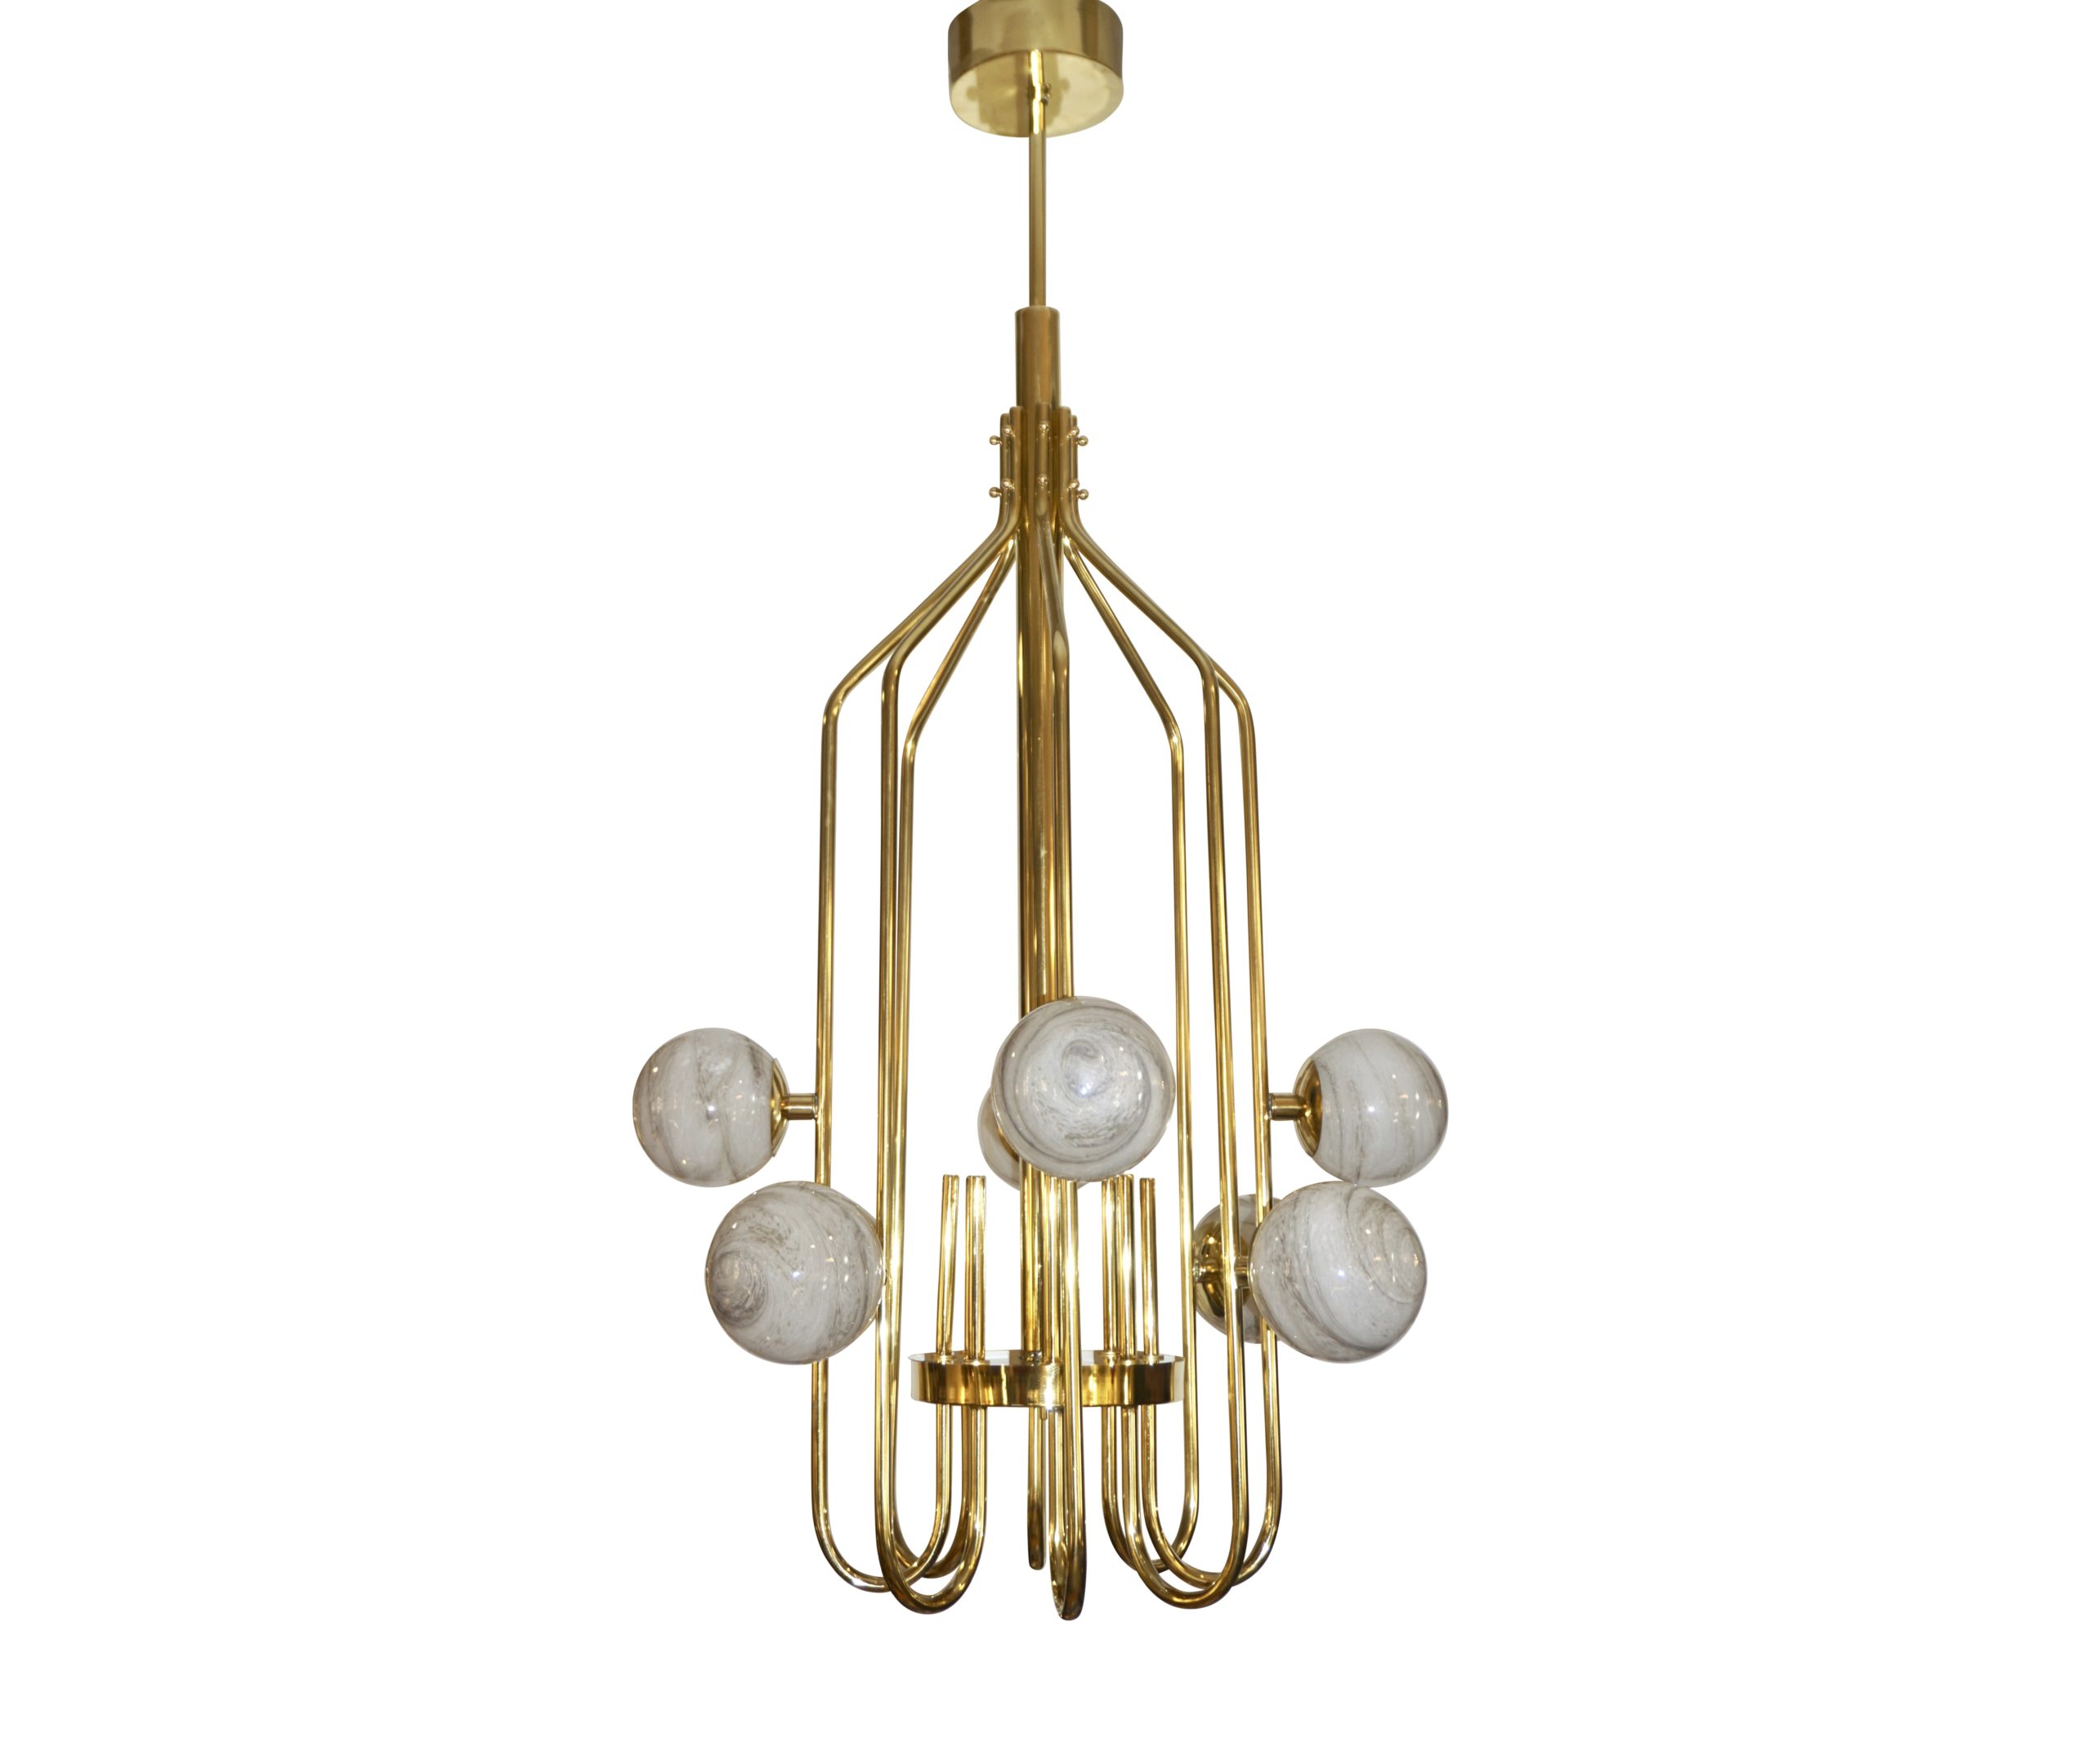 cosulich_interiors_and_antiques_products_new_york_design_bespoke_italian_alabaster_white_murano_glass_brass_curved_globe_chandelier-scaled-1